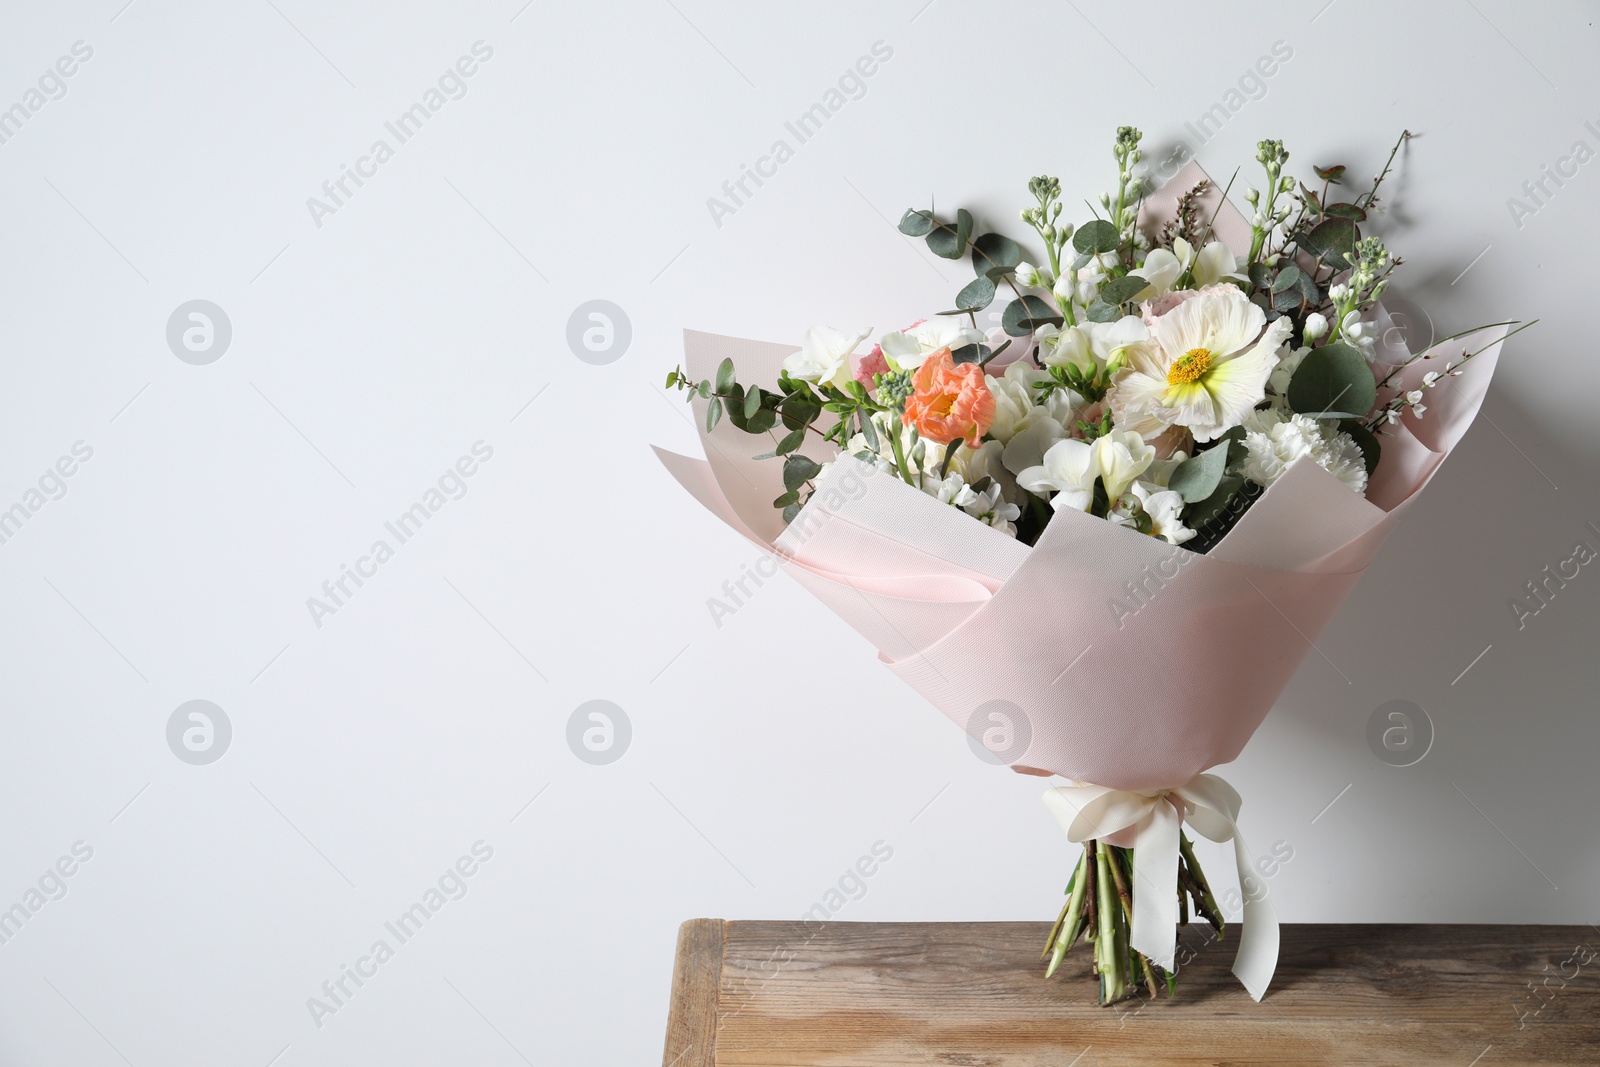 Photo of Bouquet of beautiful flowers on wooden table against white wall. Space for text